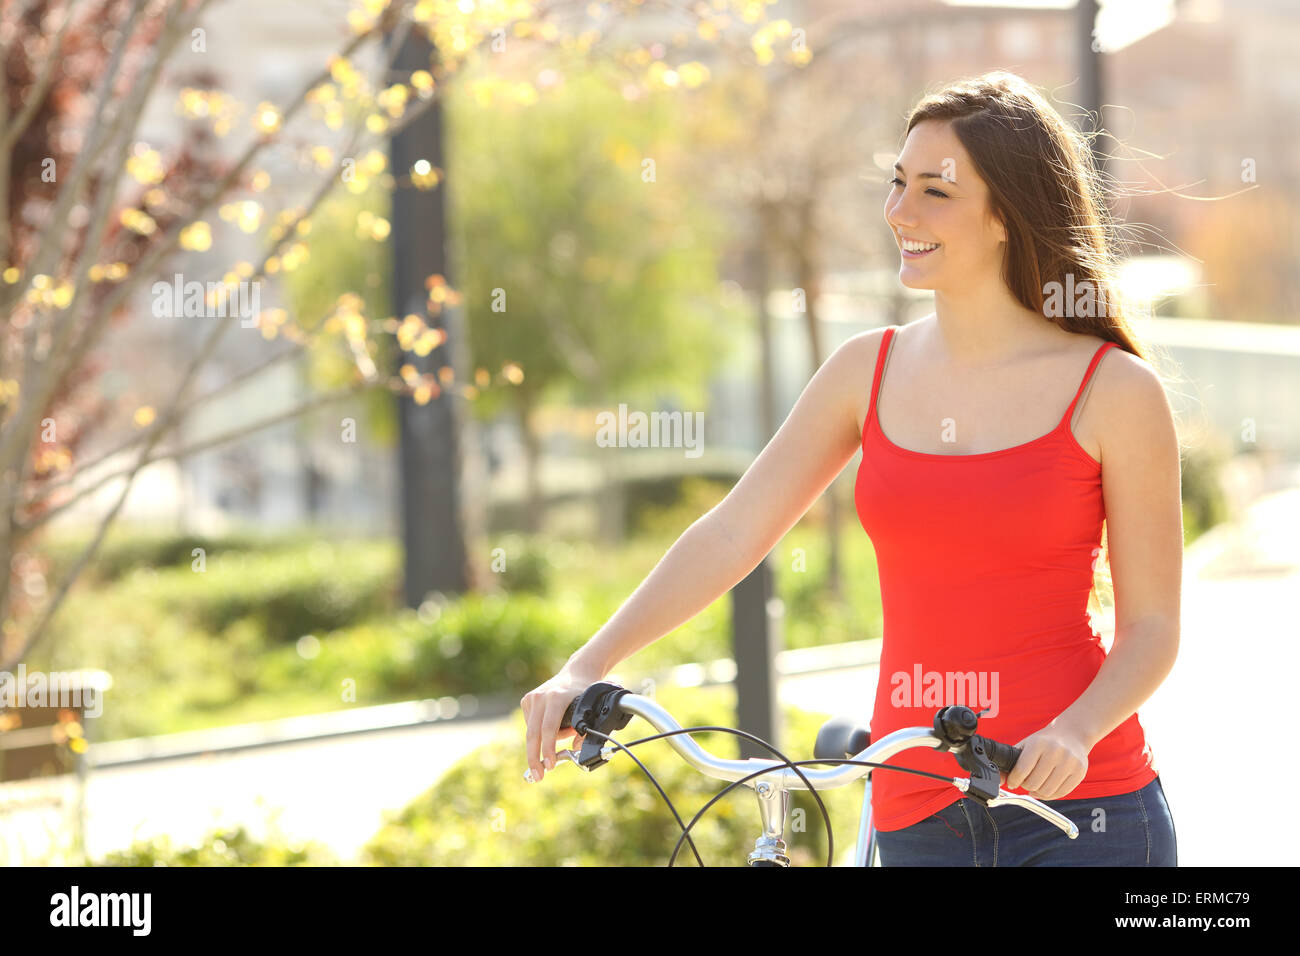 Candid woman walking in an urban park in summer or spring carrying a bicycle Stock Photo